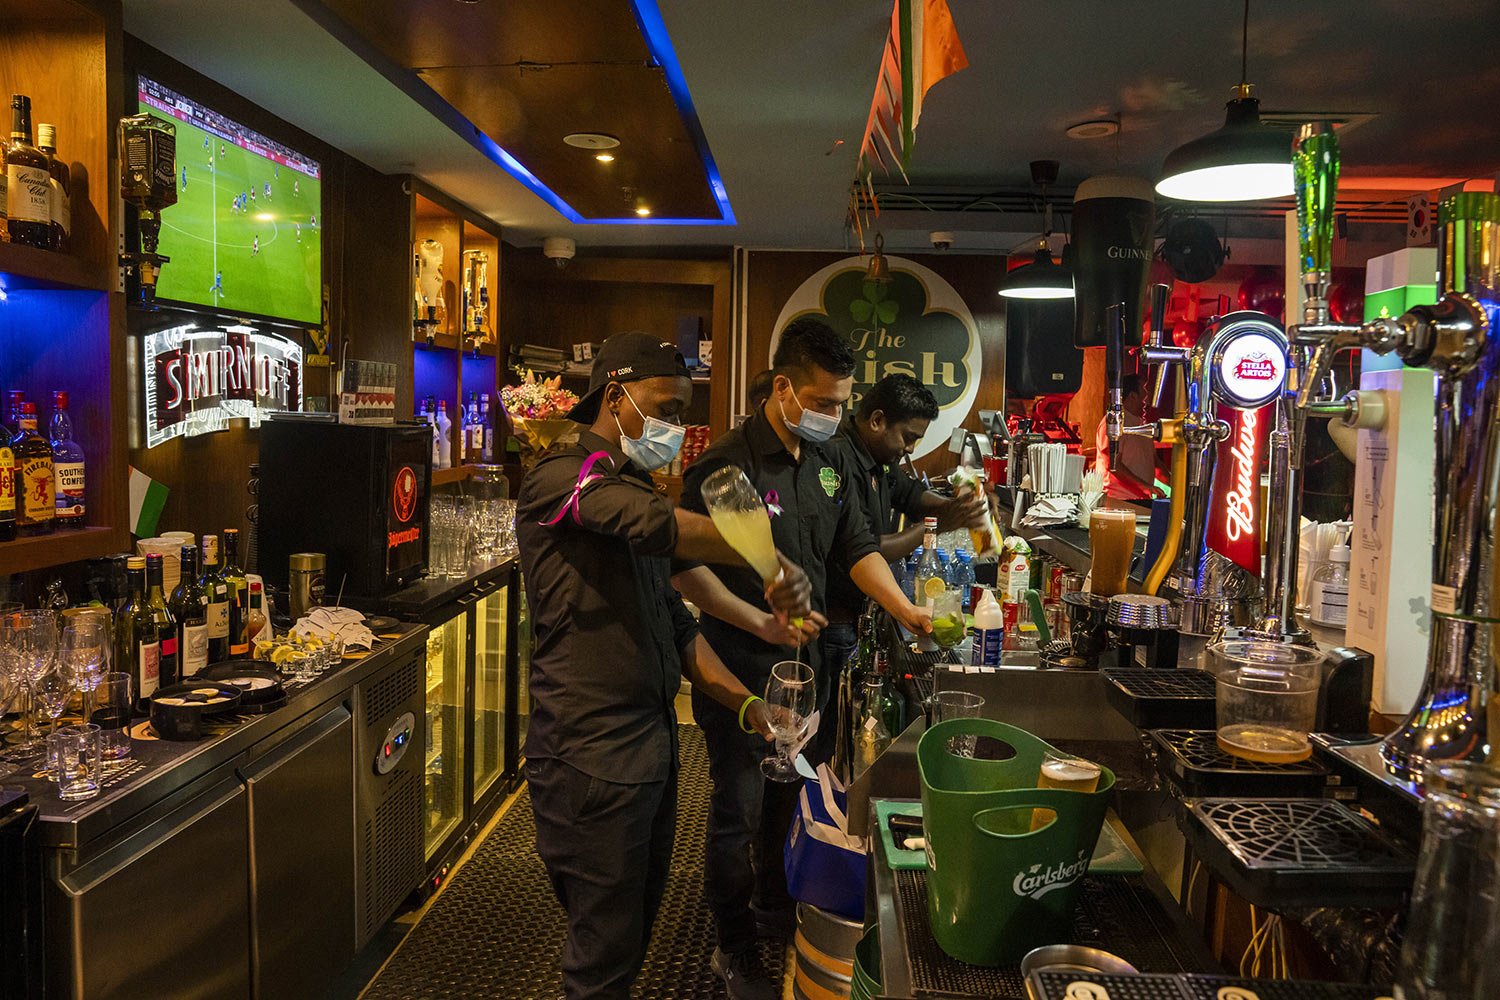  Baristas make drinks at "The Irish Pub," which will be one of the bars showing World Cup 2022 matches on live screens in Doha, Qatar, Thursday, Oct. 20, 2022. (AP Photo/Nariman El-Mofty) 